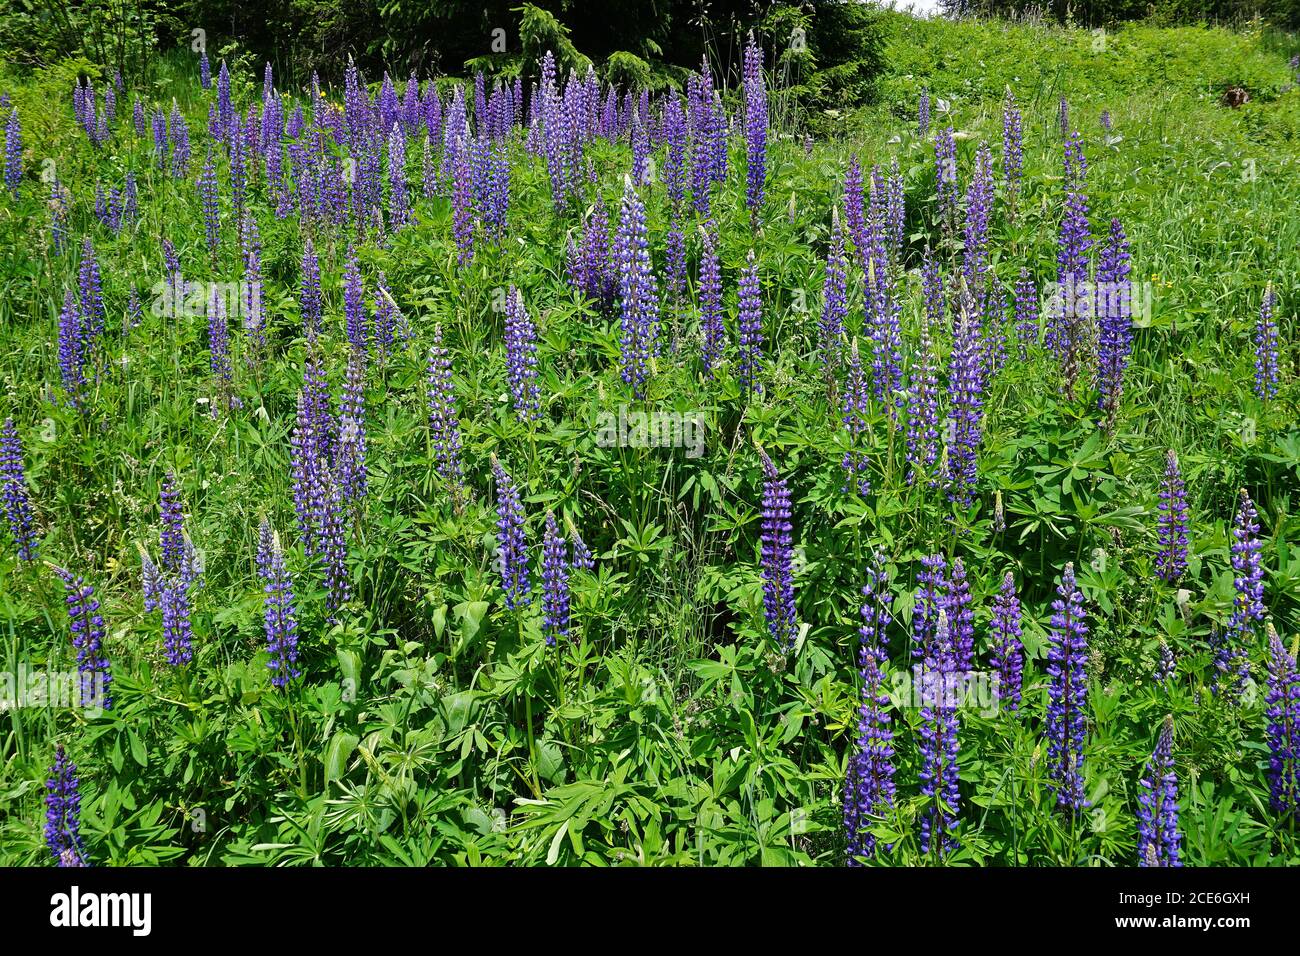 large-leaved lupin in Austria, Europe Stock Photo